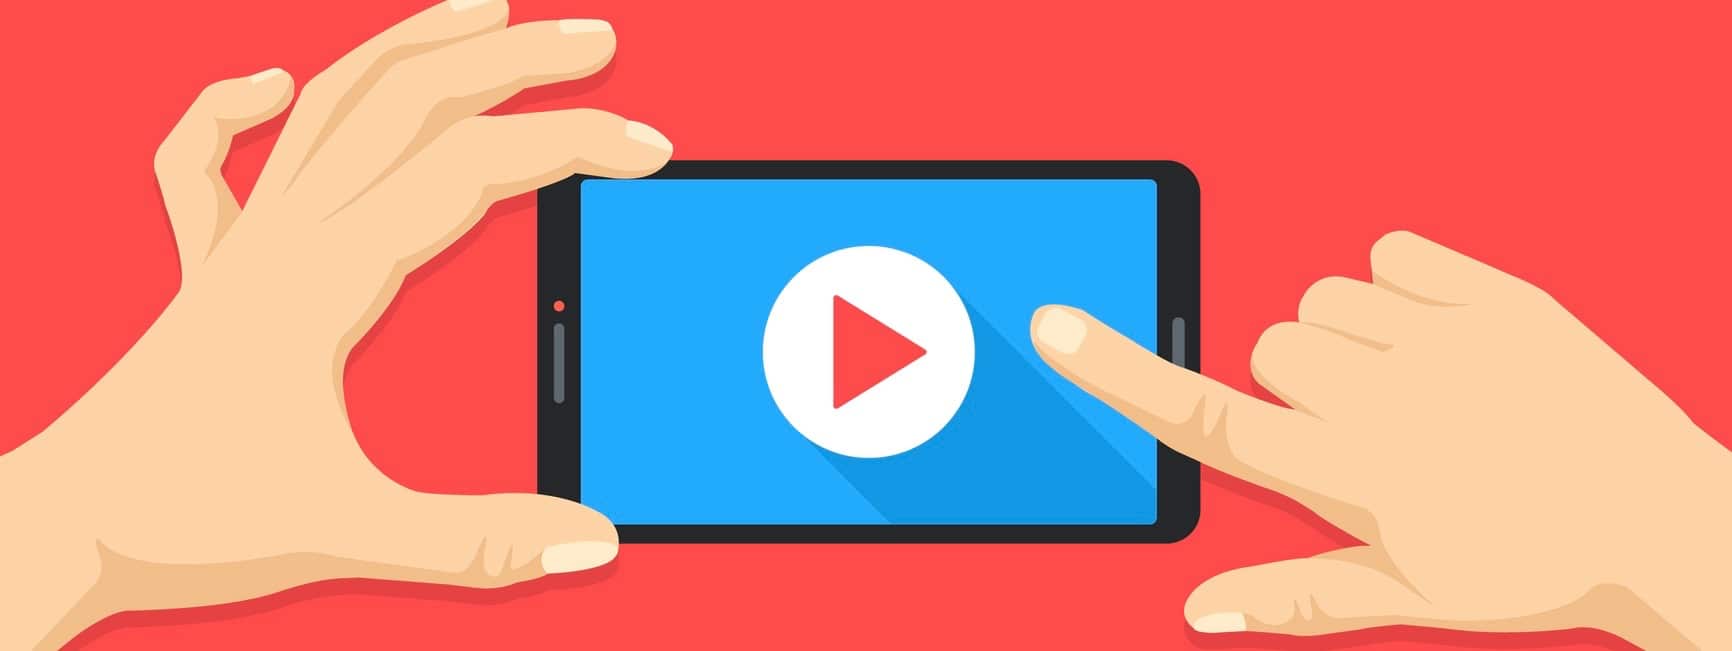 Mobile video. Human hands holding smartphone with online video player on screen. Mobile phone with play button. Modern flat design. Vector illustration